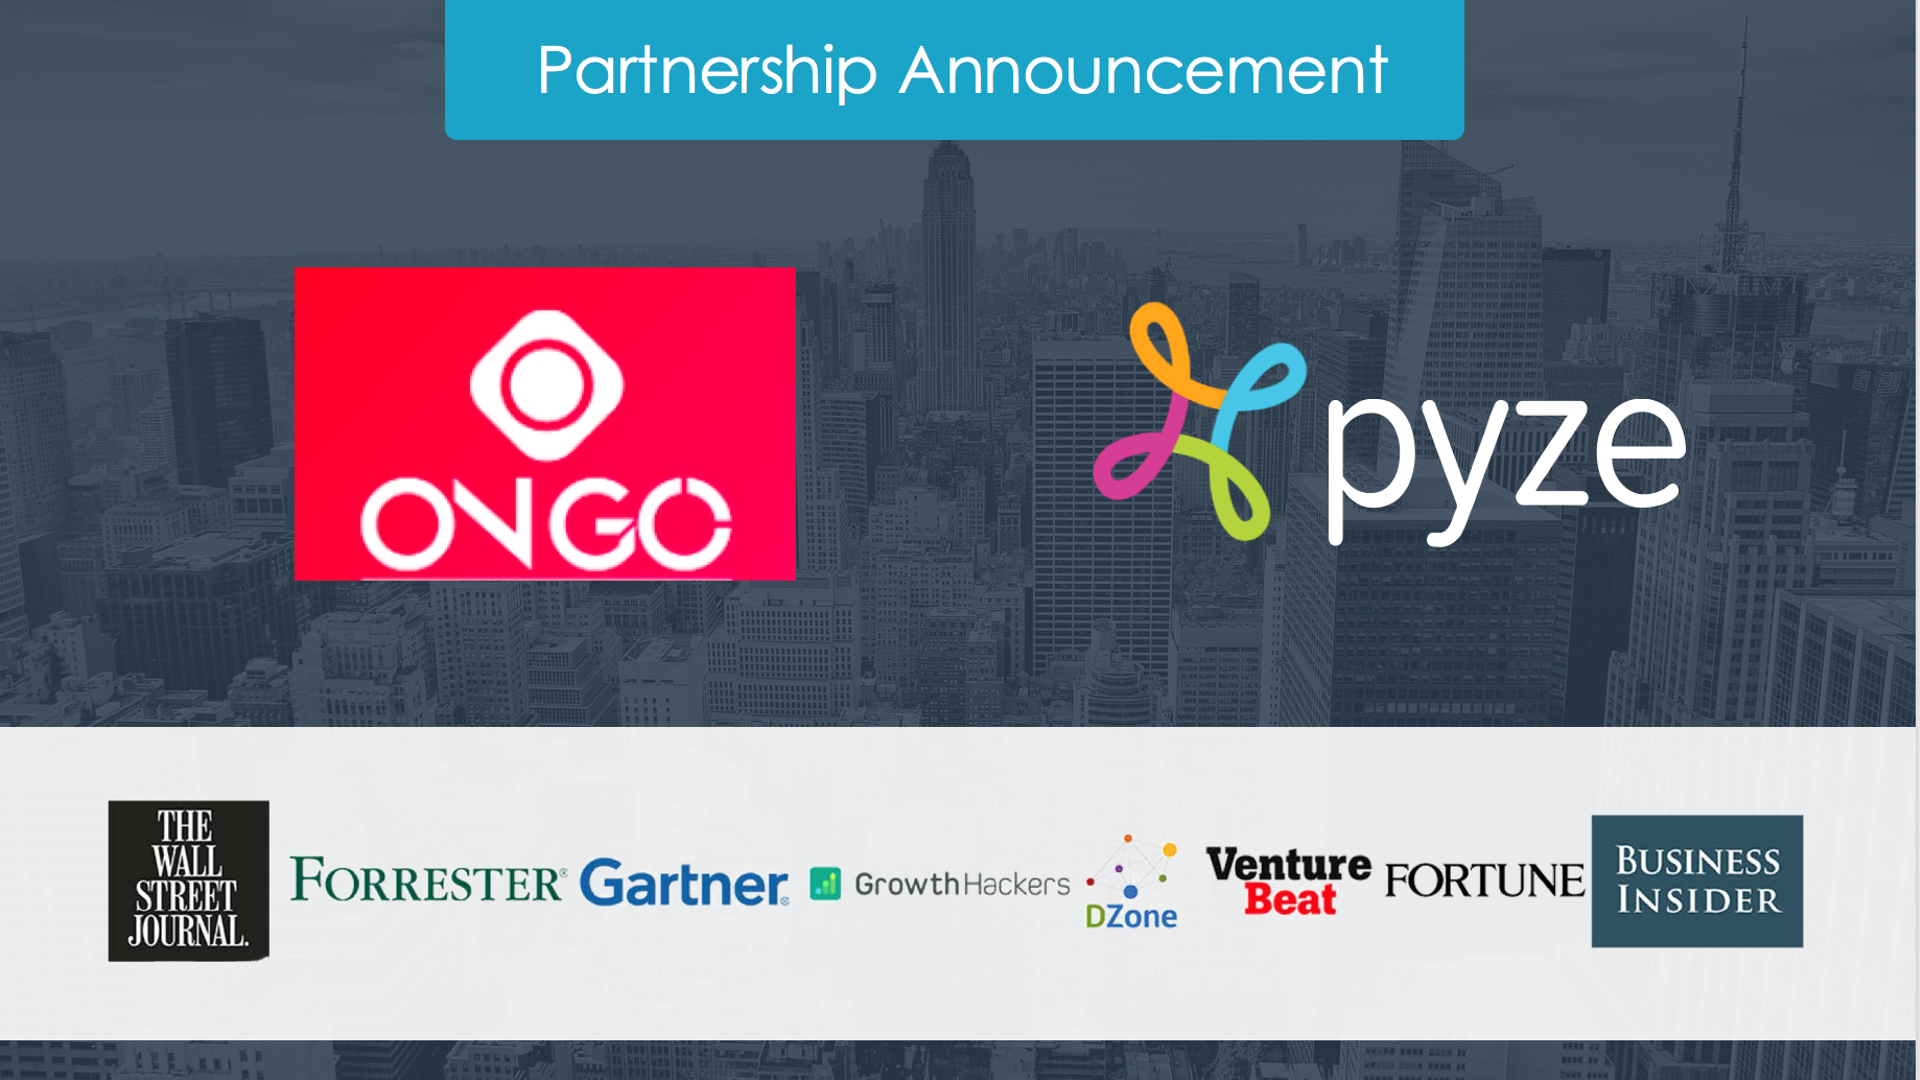 Pyze and ONGO Team Up to Deliver World Class Analytics, Marketing and Personalization to App Publishers